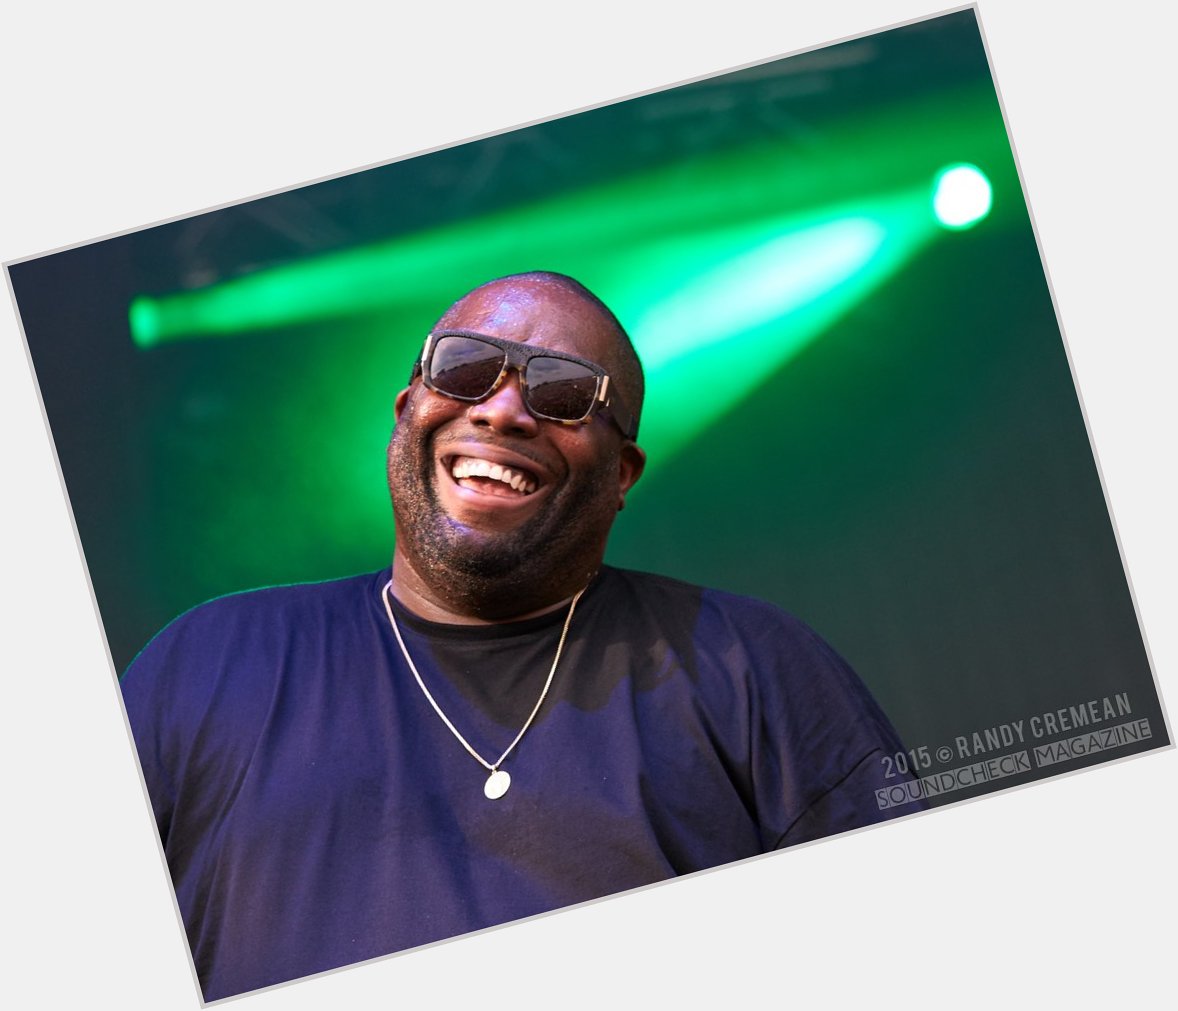 Happy birthday to the legend, Killer Mike! See you at 